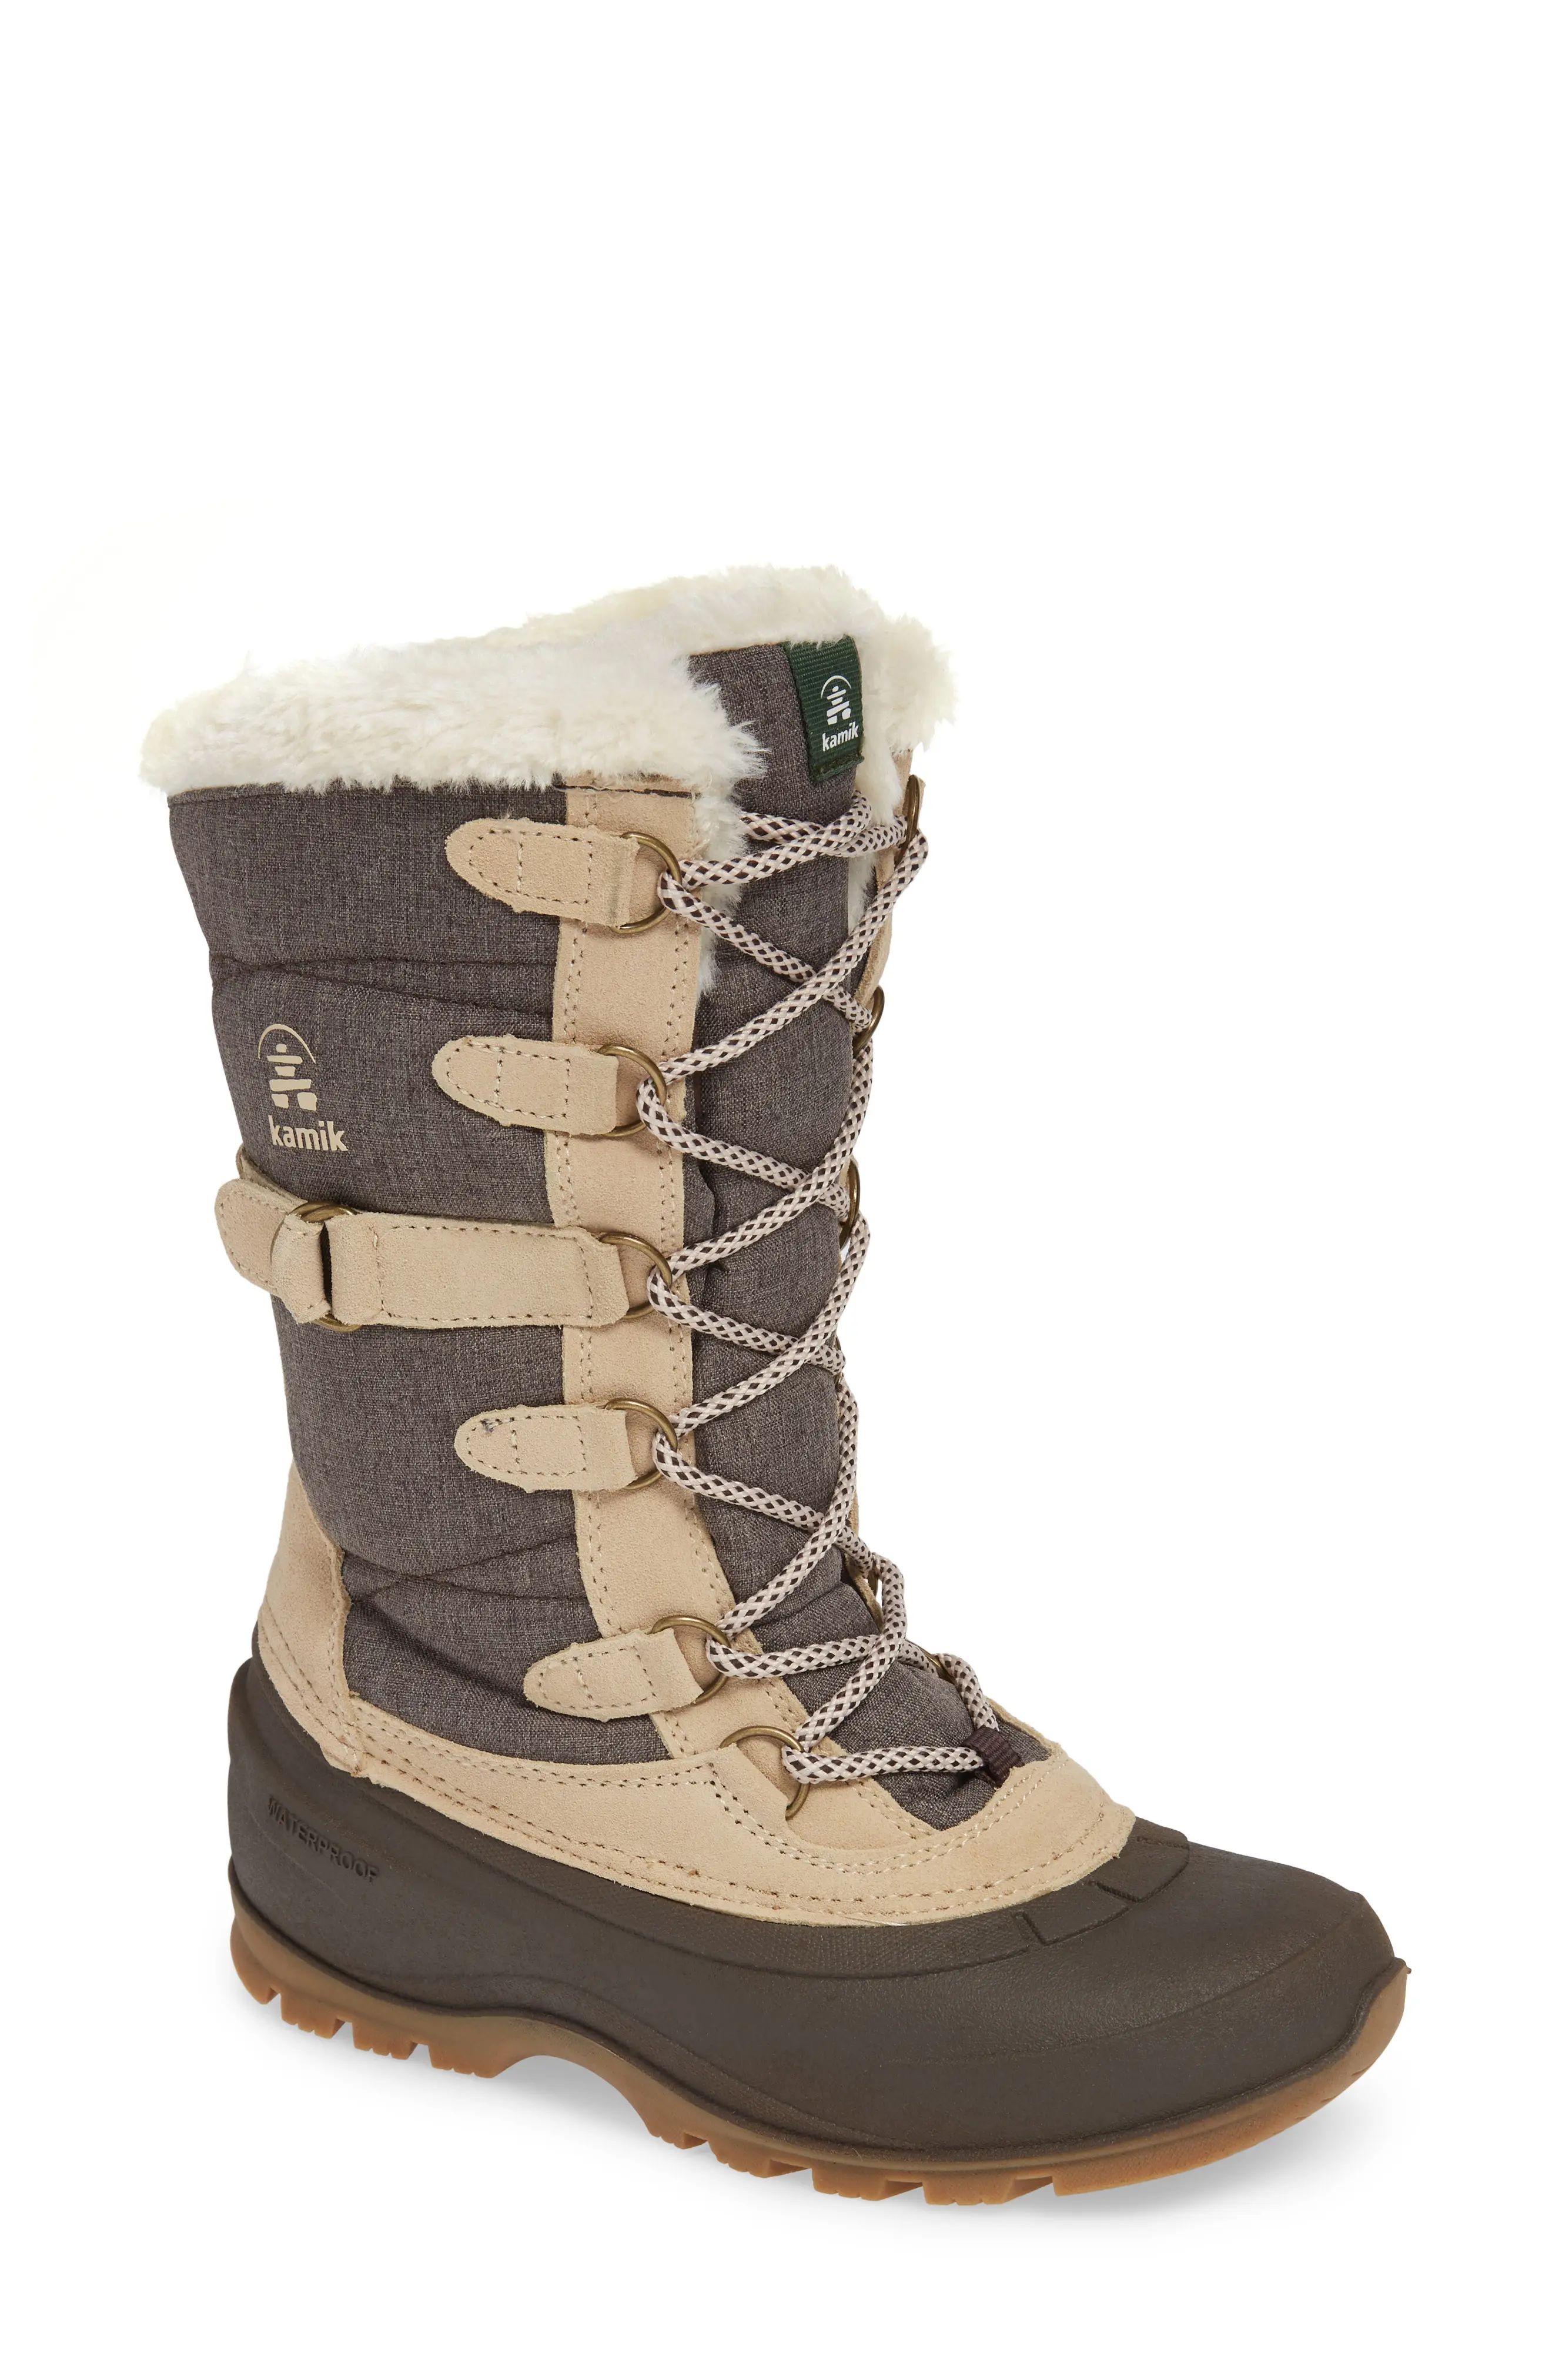 Women's Kamik Snovalley2 Waterproof Thinsulate-Insulated Snow Boot, Size 5 M - Brown | Nordstrom